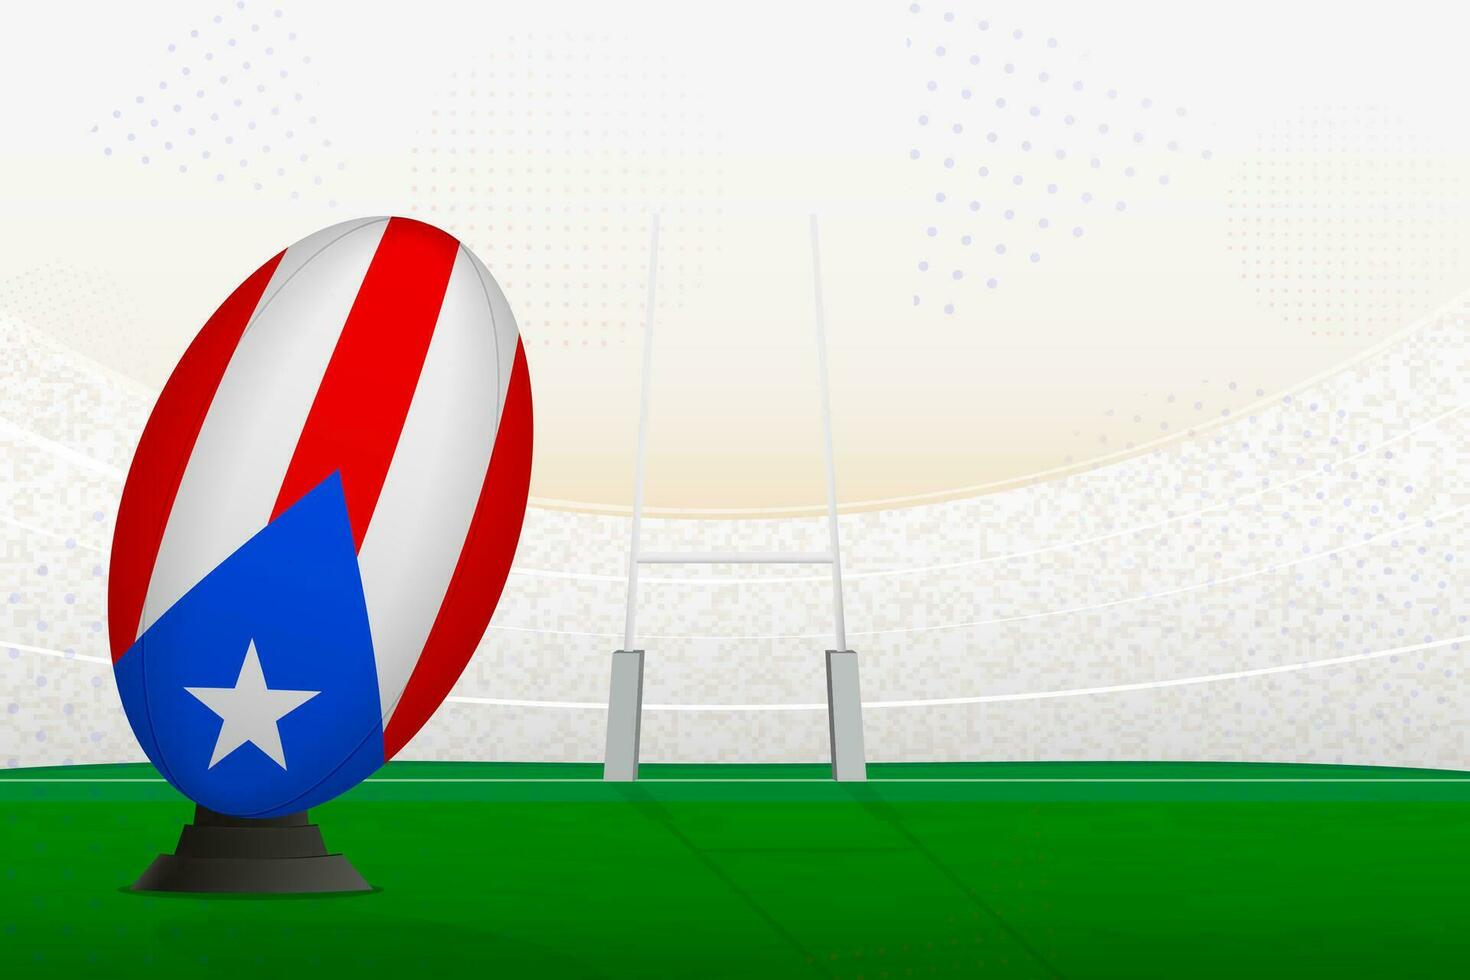 Puerto Rico national team rugby ball on rugby stadium and goal posts, preparing for a penalty or free kick. vector